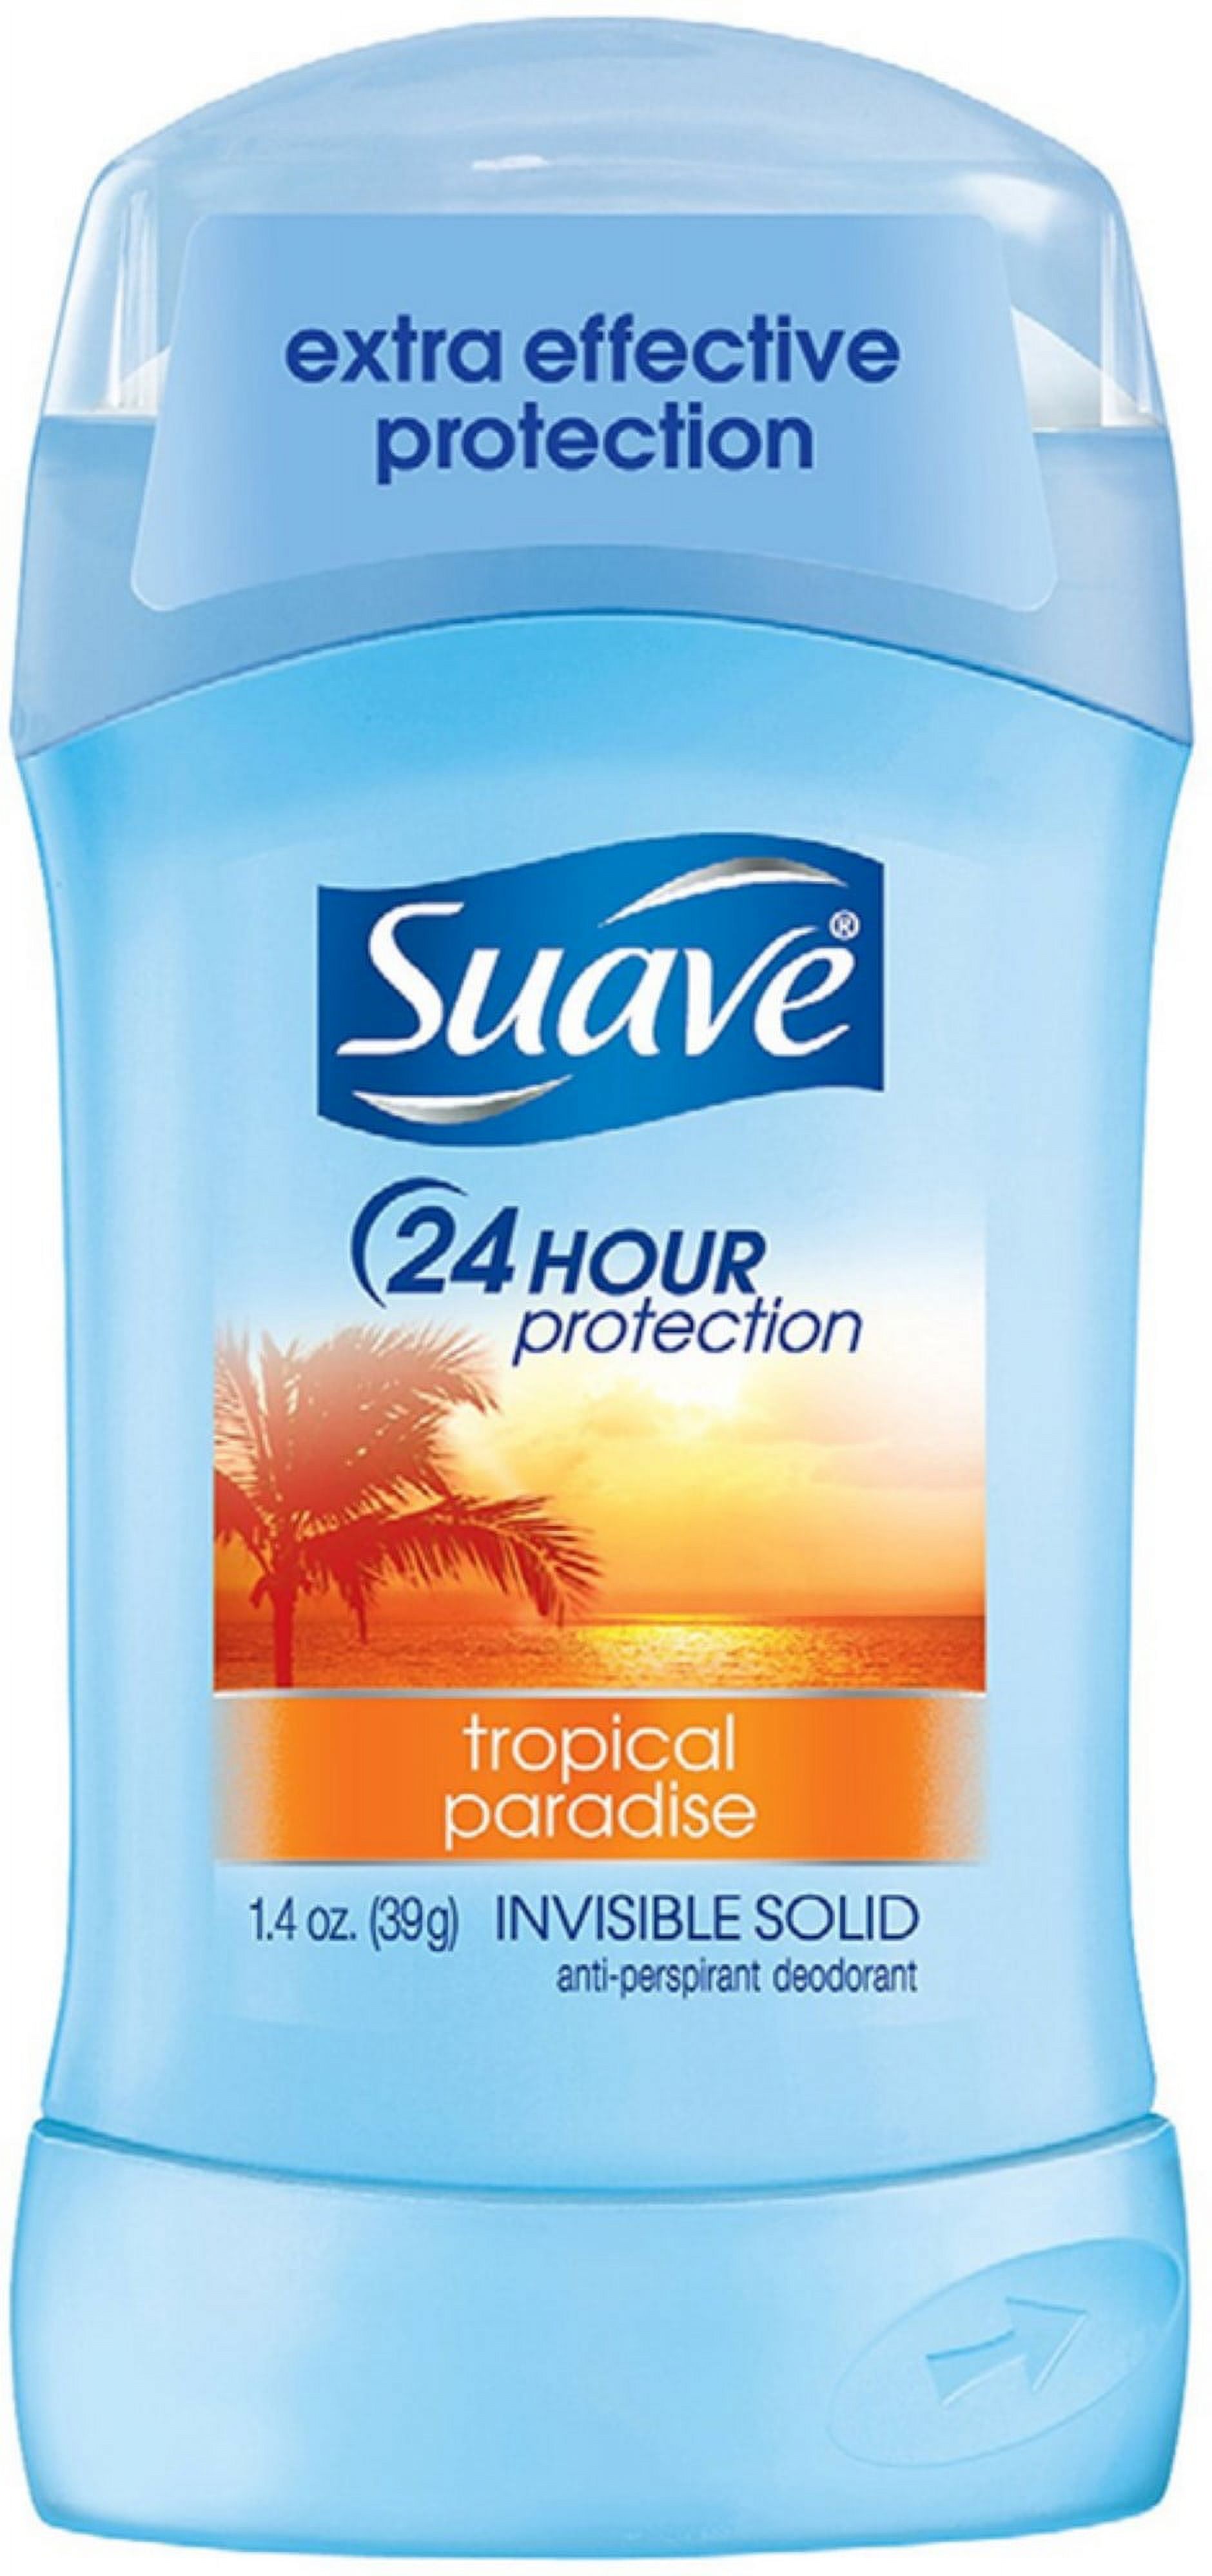 Suave 24 Hour Protection Anti-Perspirant Deodorant Invisible Solid, Tropical Paradise 1.40 oz - image 1 of 7